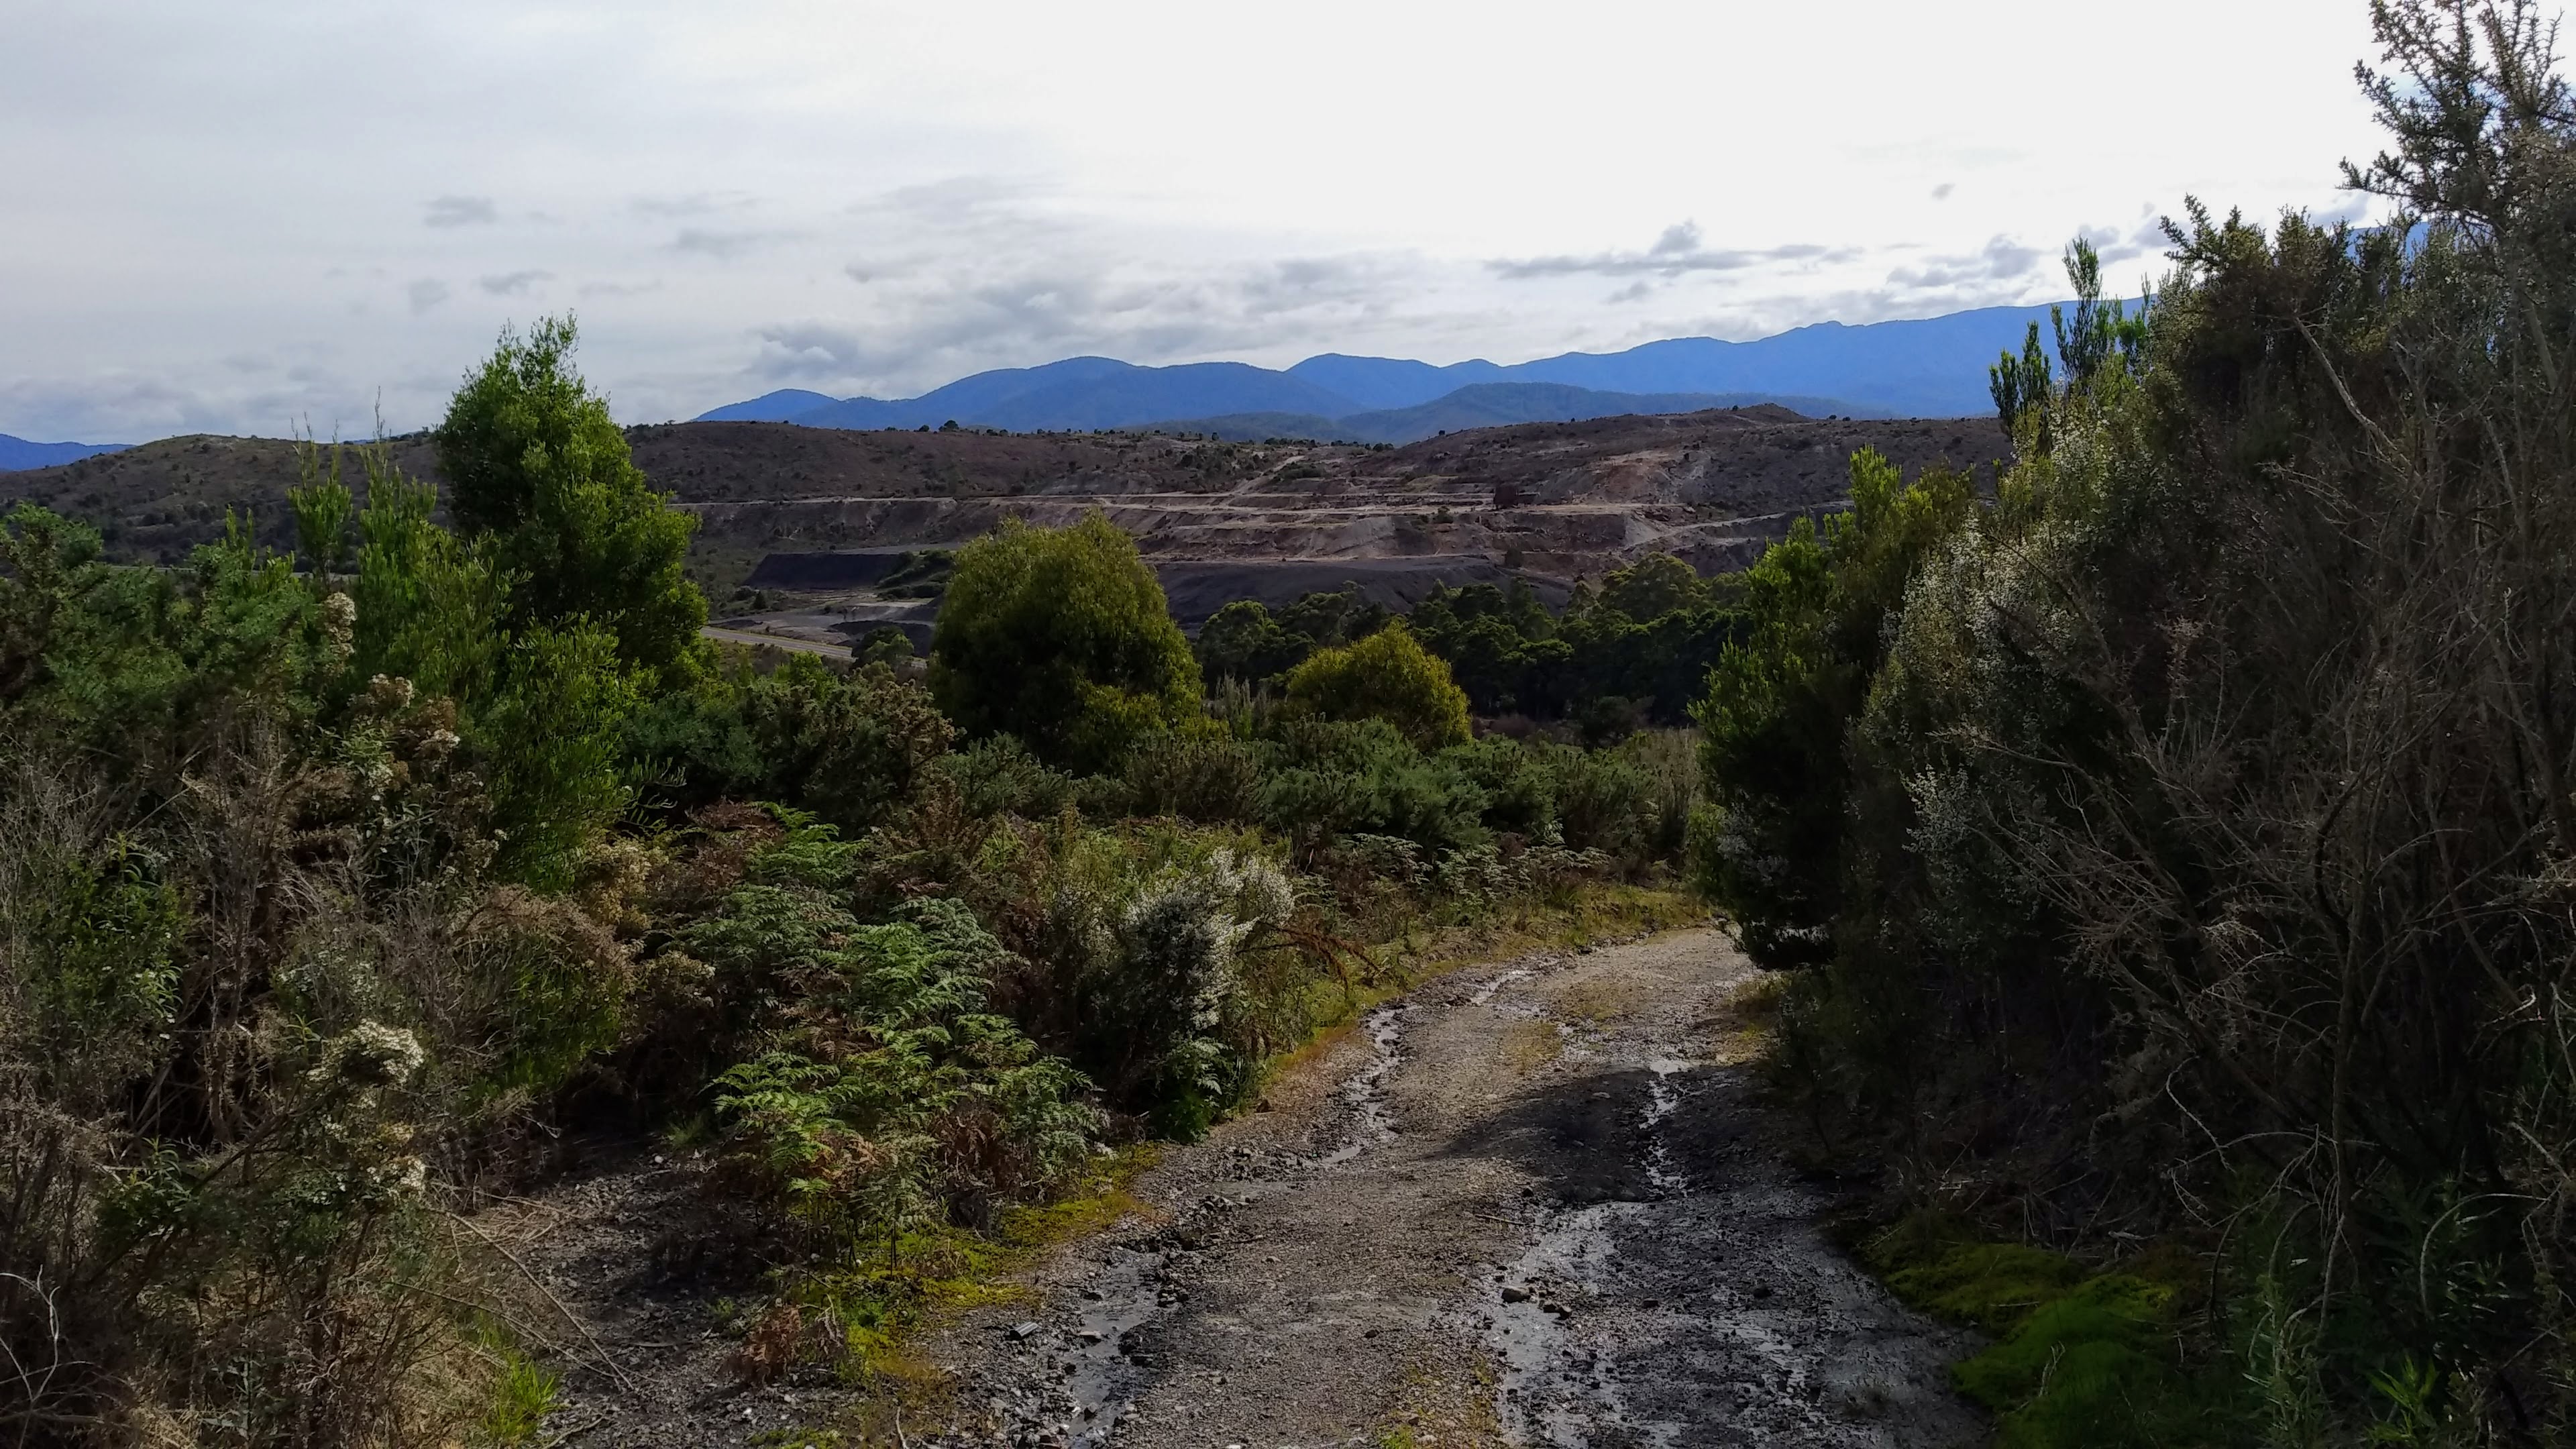 Looking across Henty road at the Austral mine